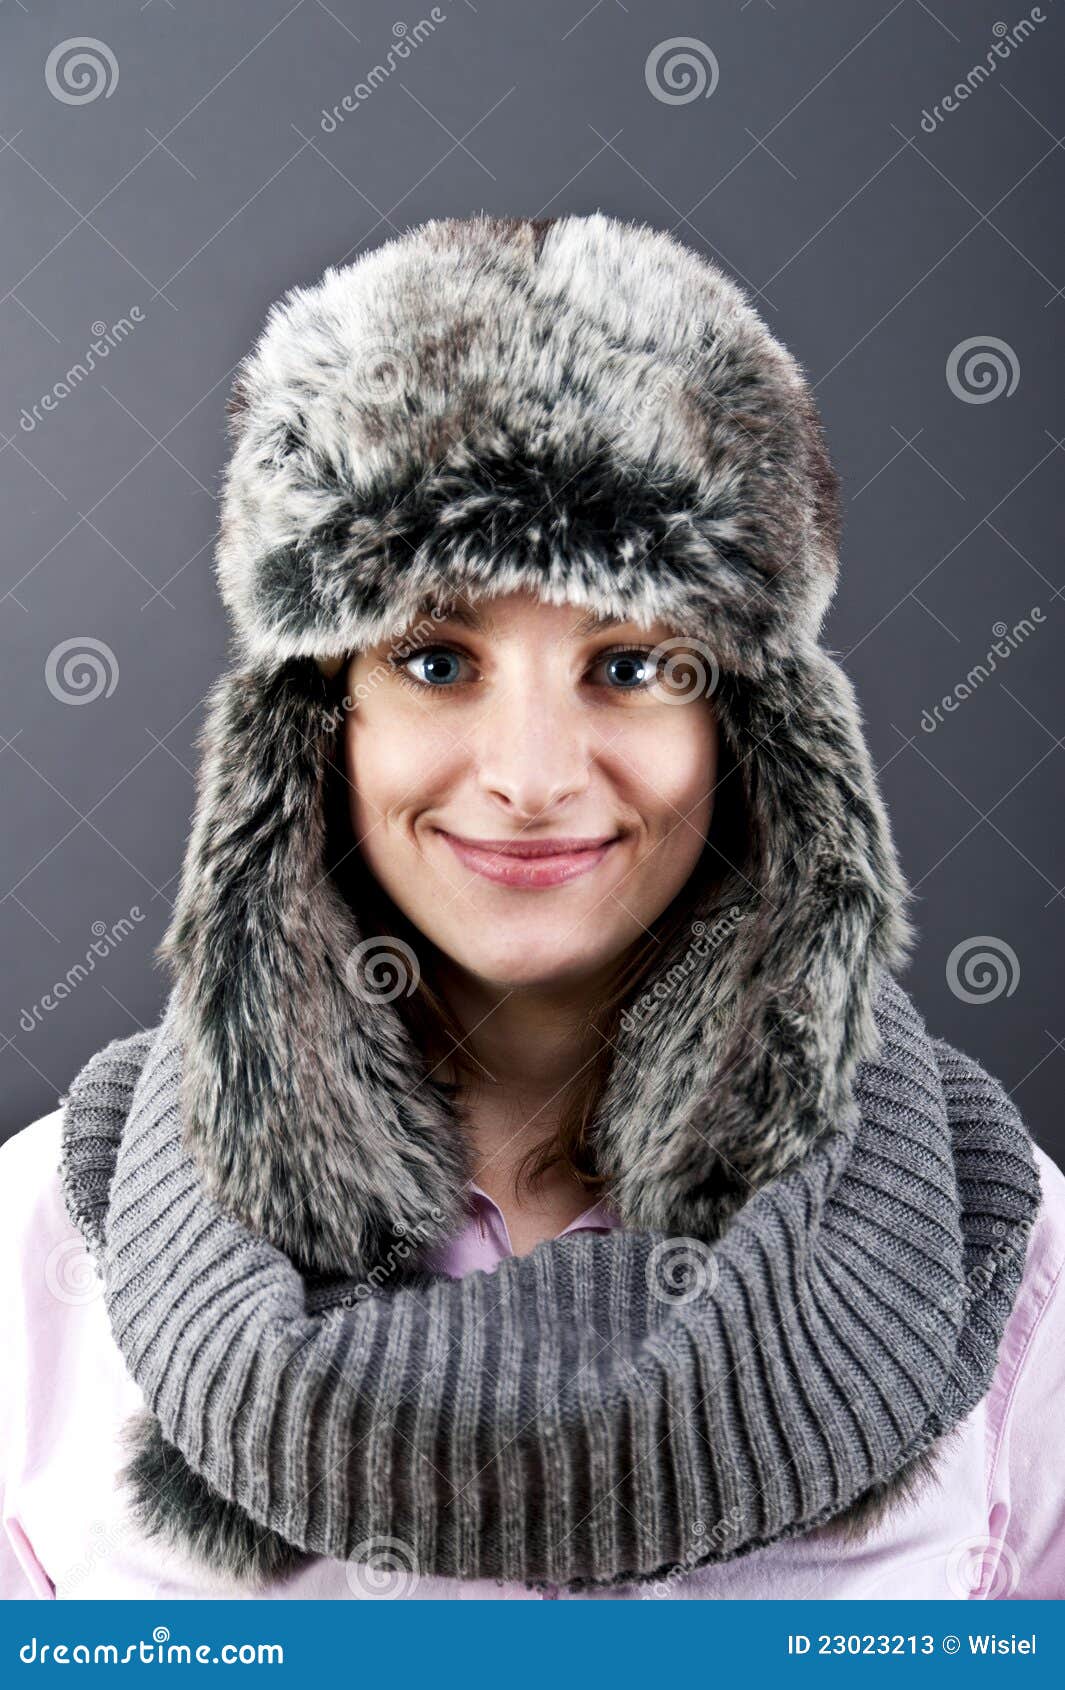 Woman in winter hat stock image. Image of closeup, adult - 23023213